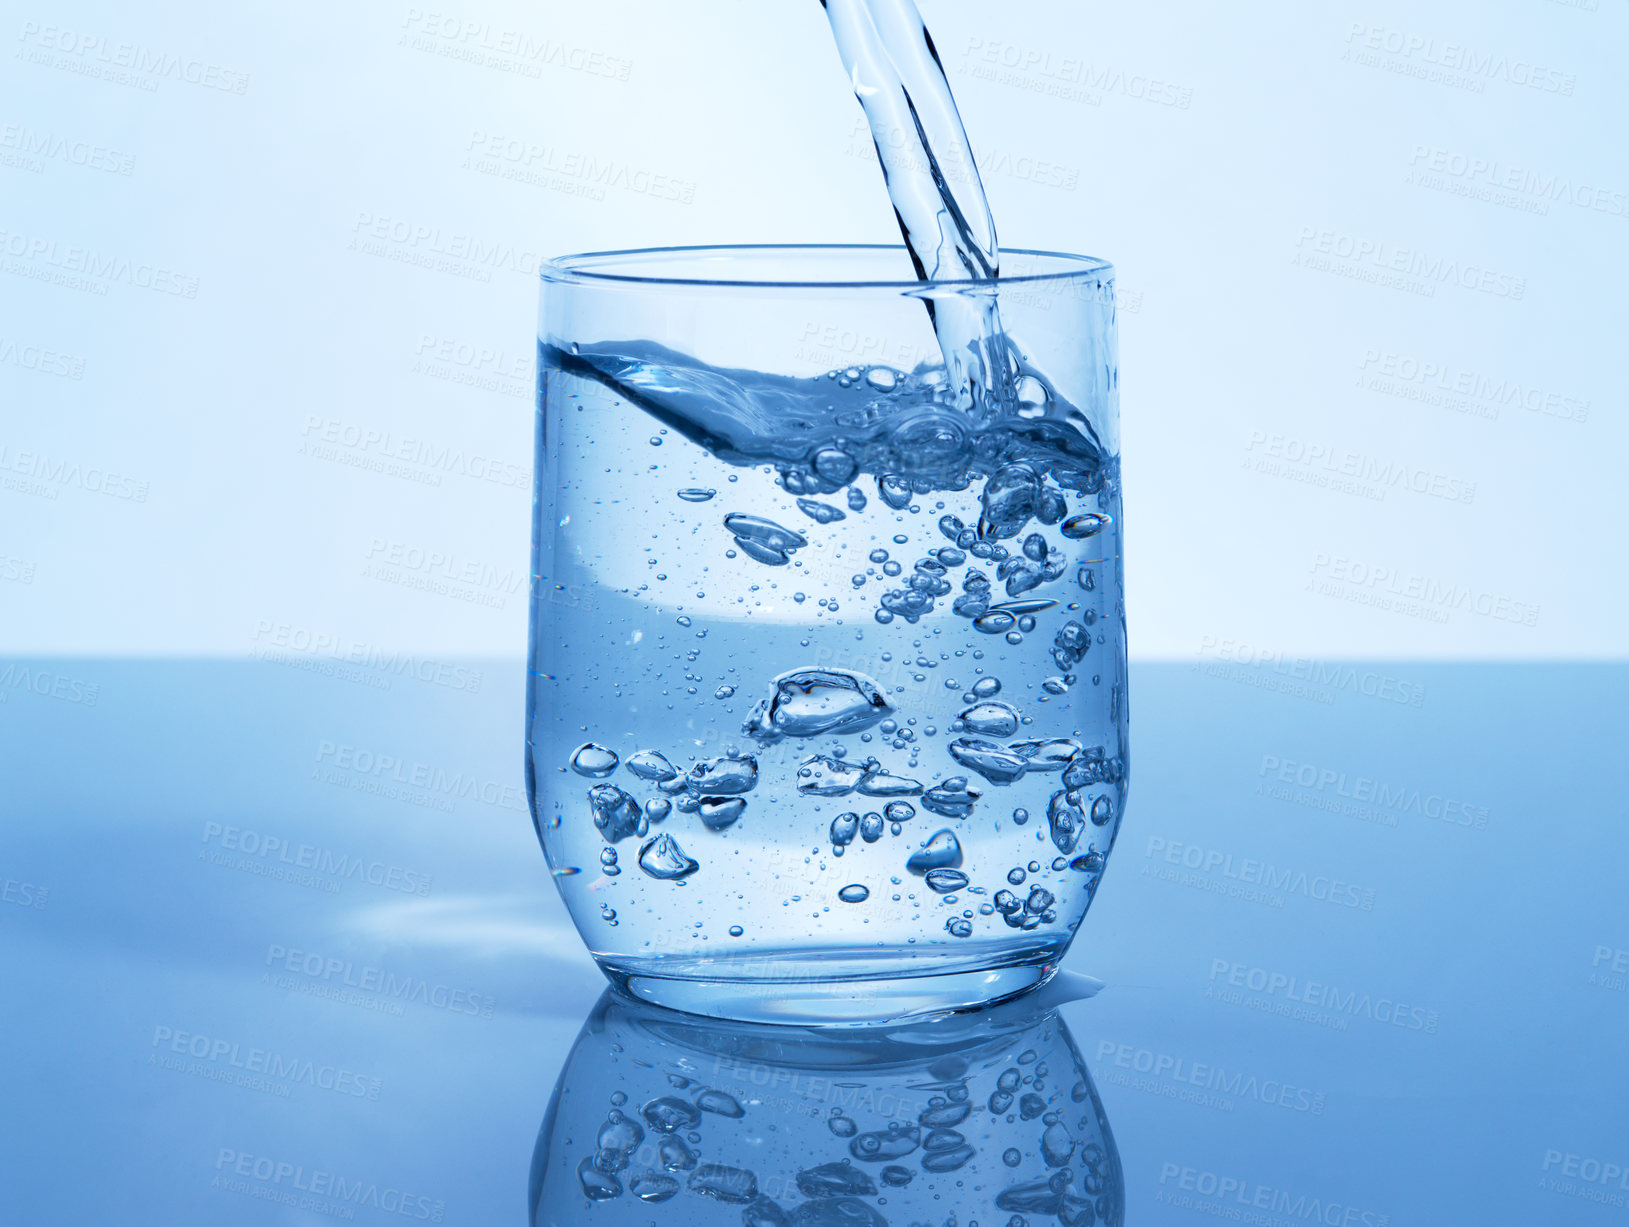 Buy stock photo Studio shot of a glass of water being poured in studio